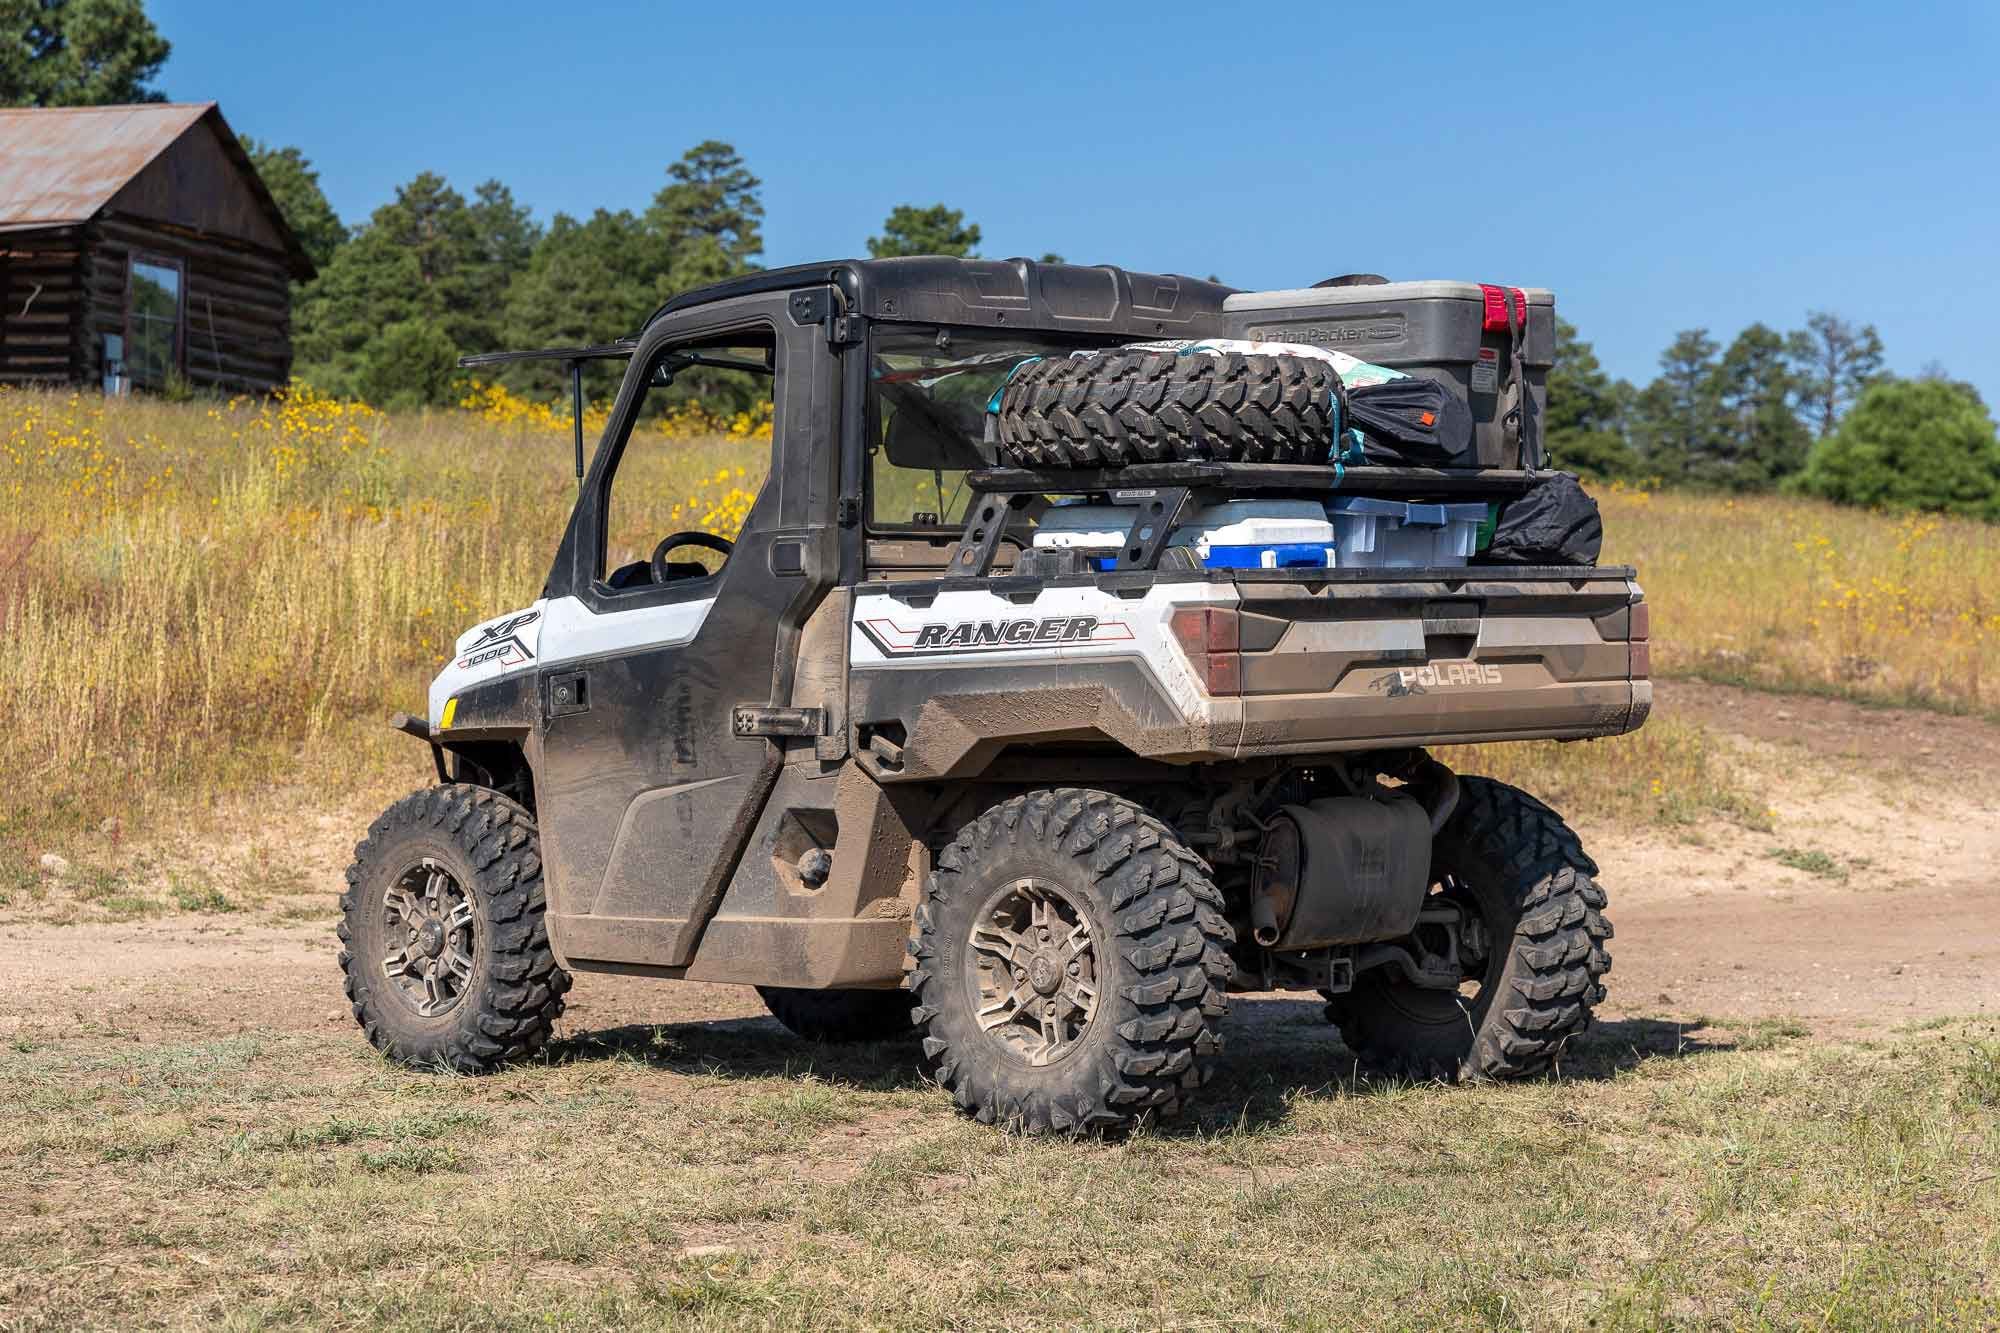 The 2021 Polaris Ranger seen fully loaded down for an overnight trip deep into the wilderness.